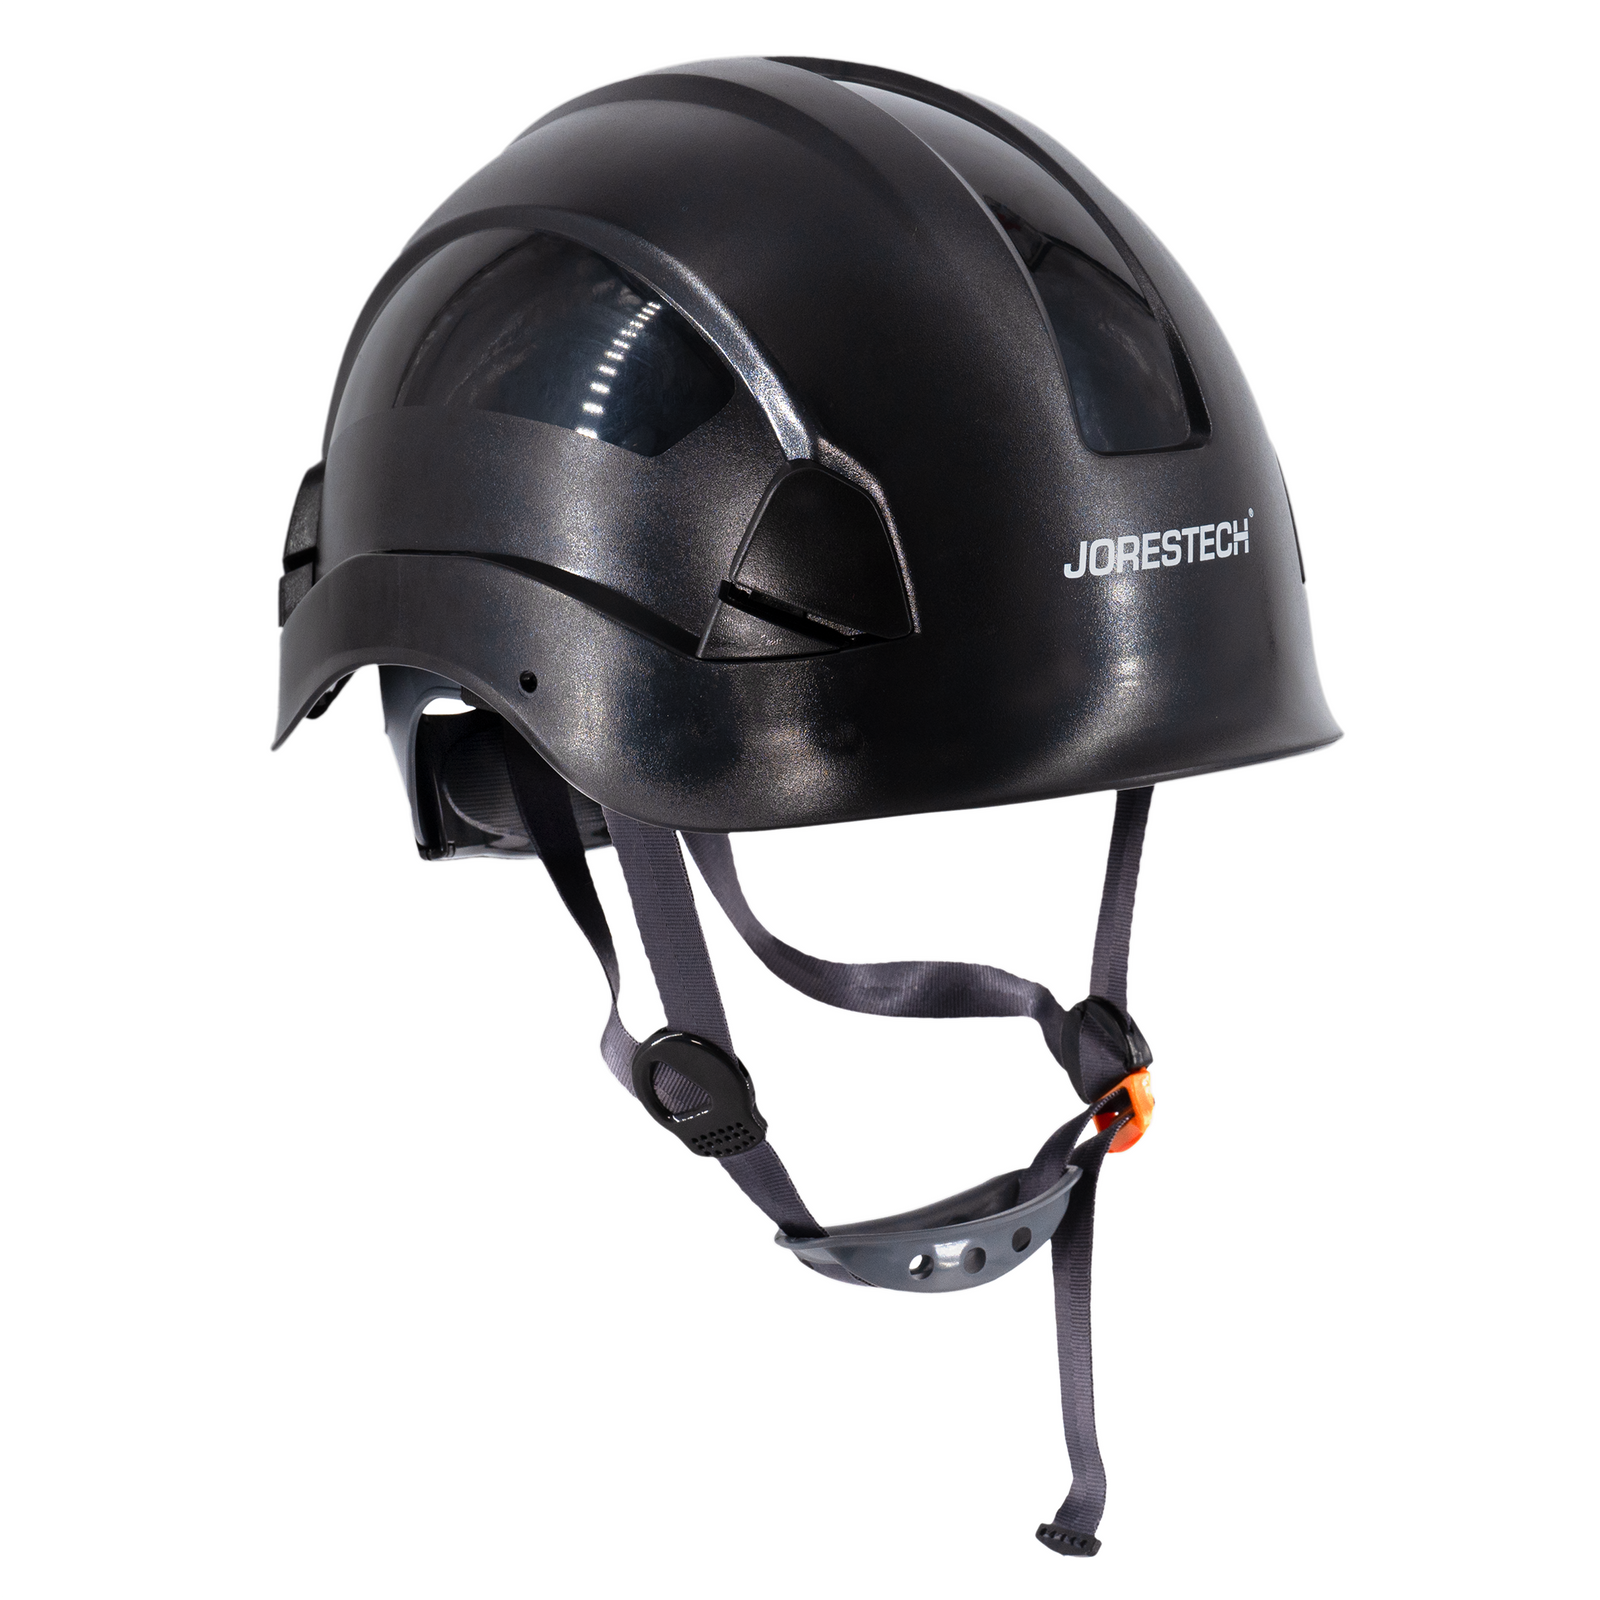 Black JORESTECH® rescue hard hat with adjustable 6 point suspension and chin strap, ANSI Z89.1-14 and Type I Class C, E, G